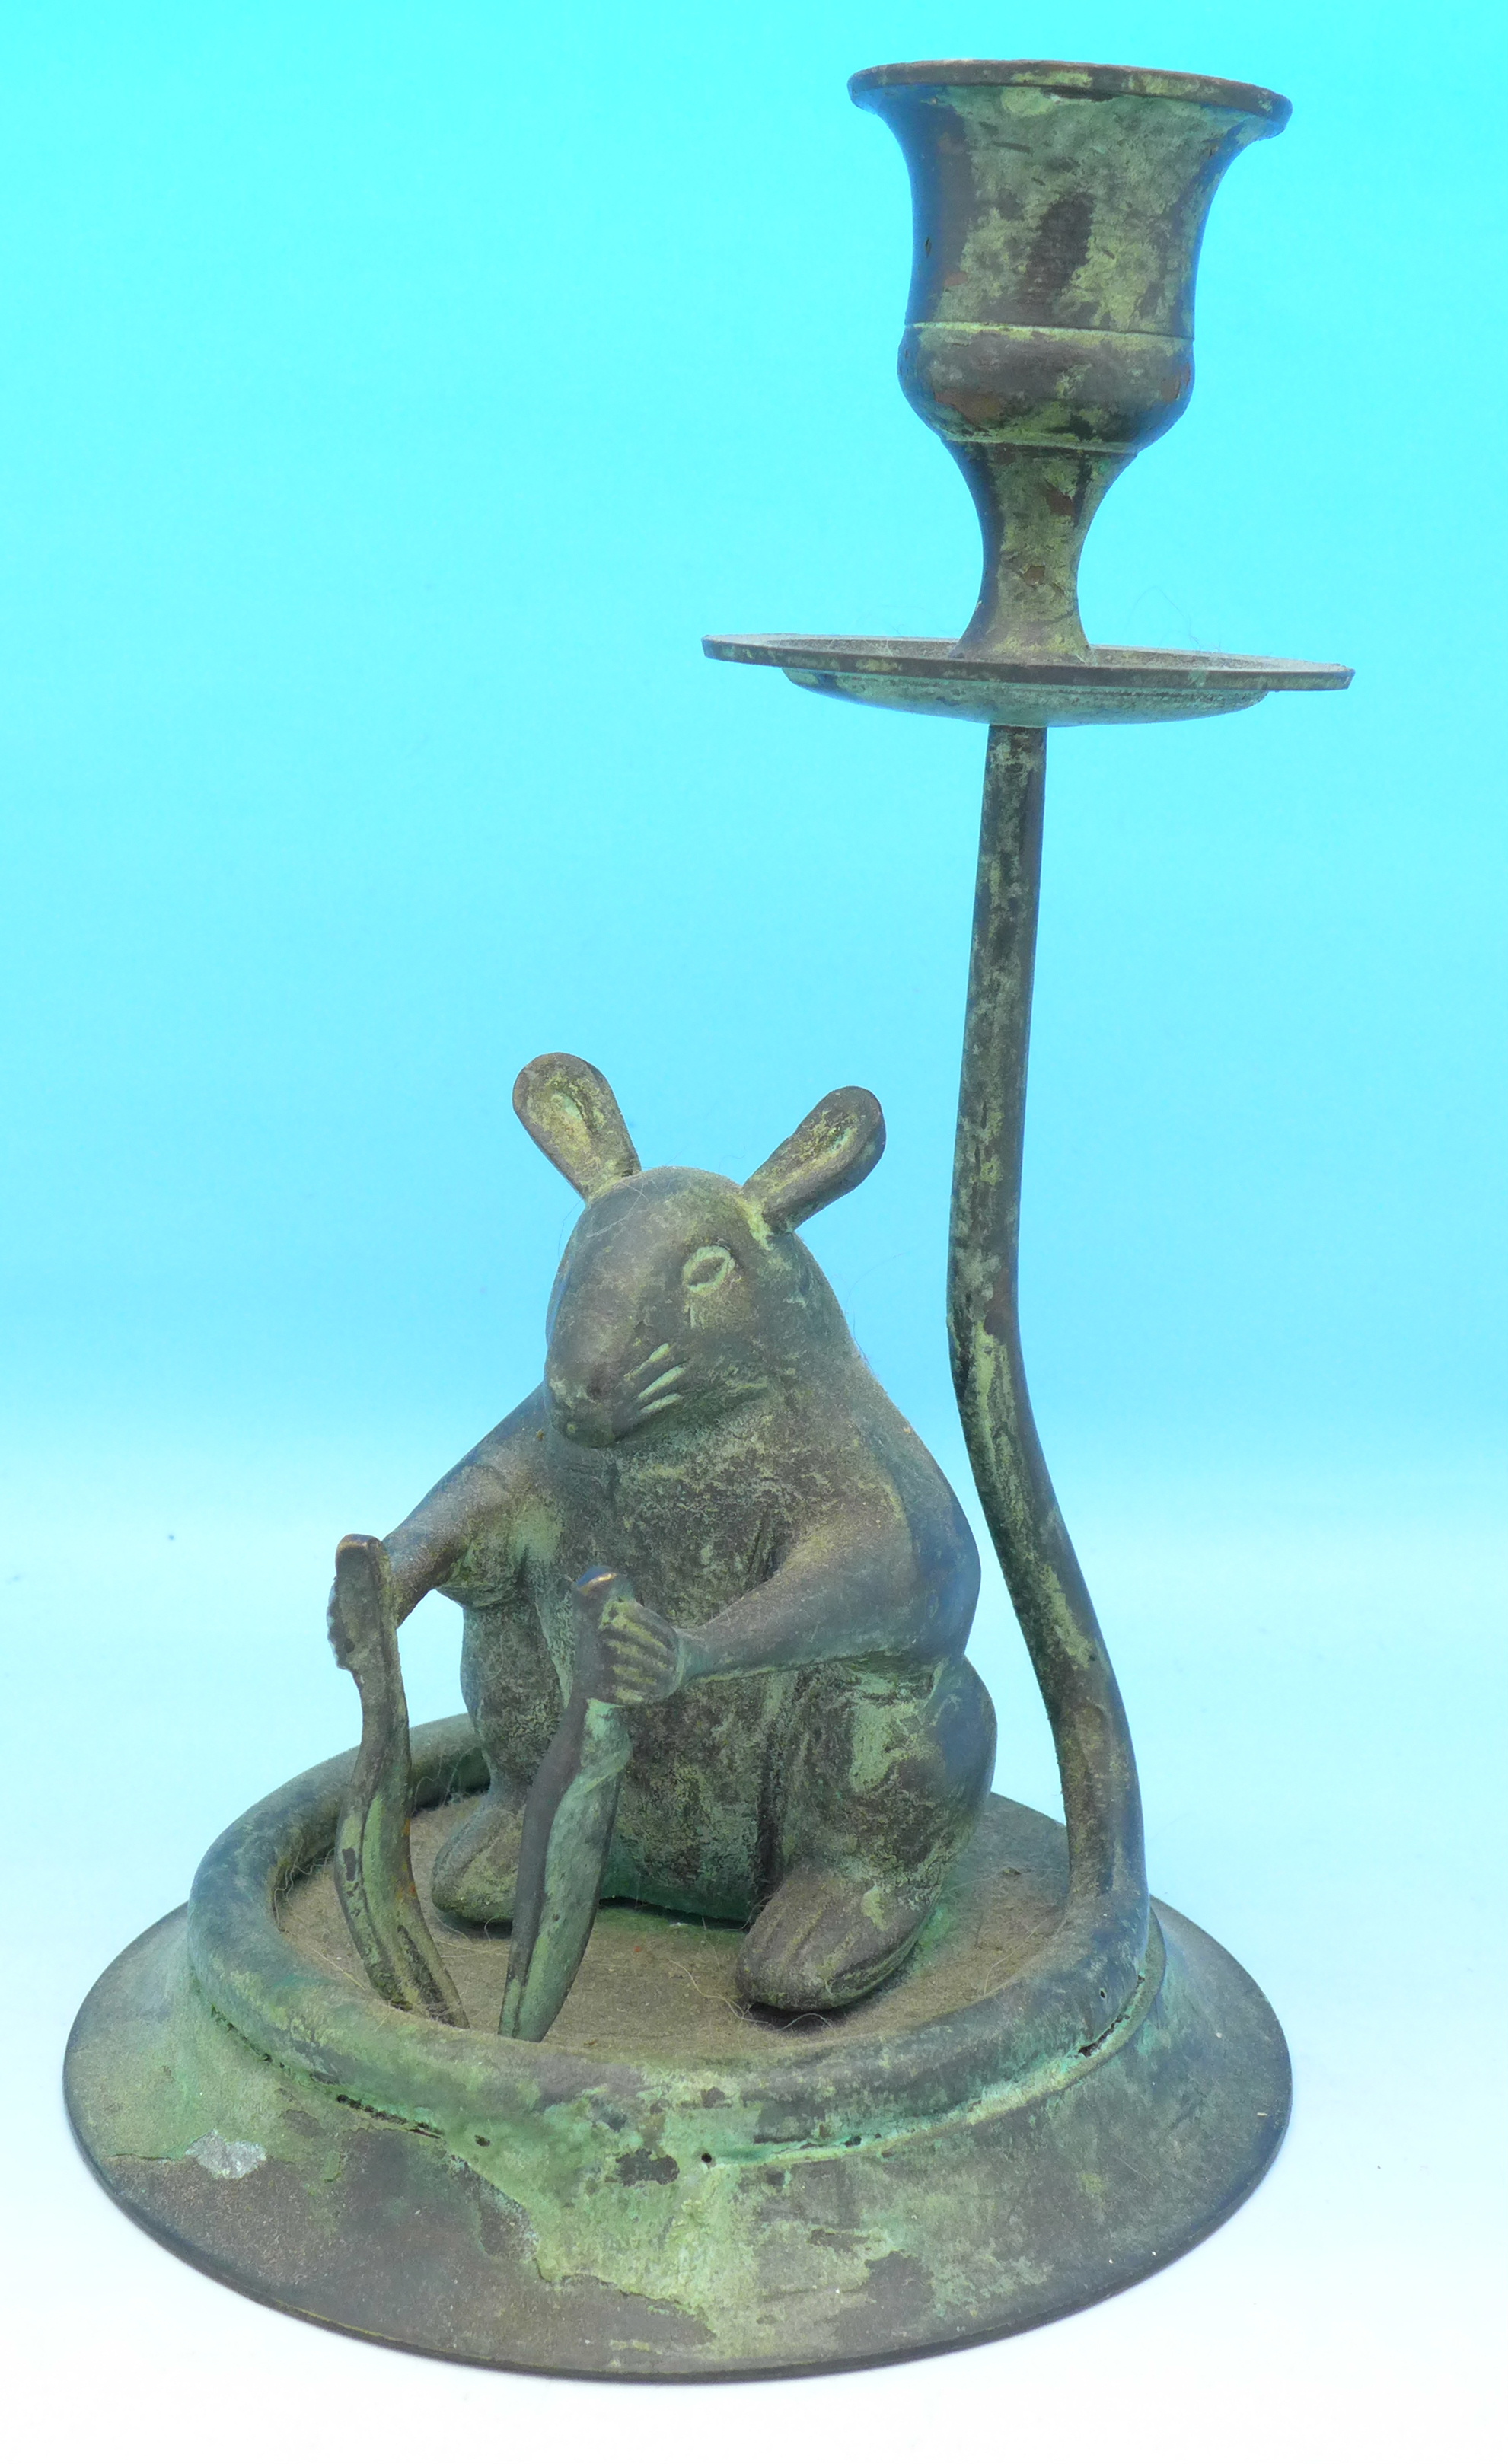 A novelty mouse figural candlestick, 15.